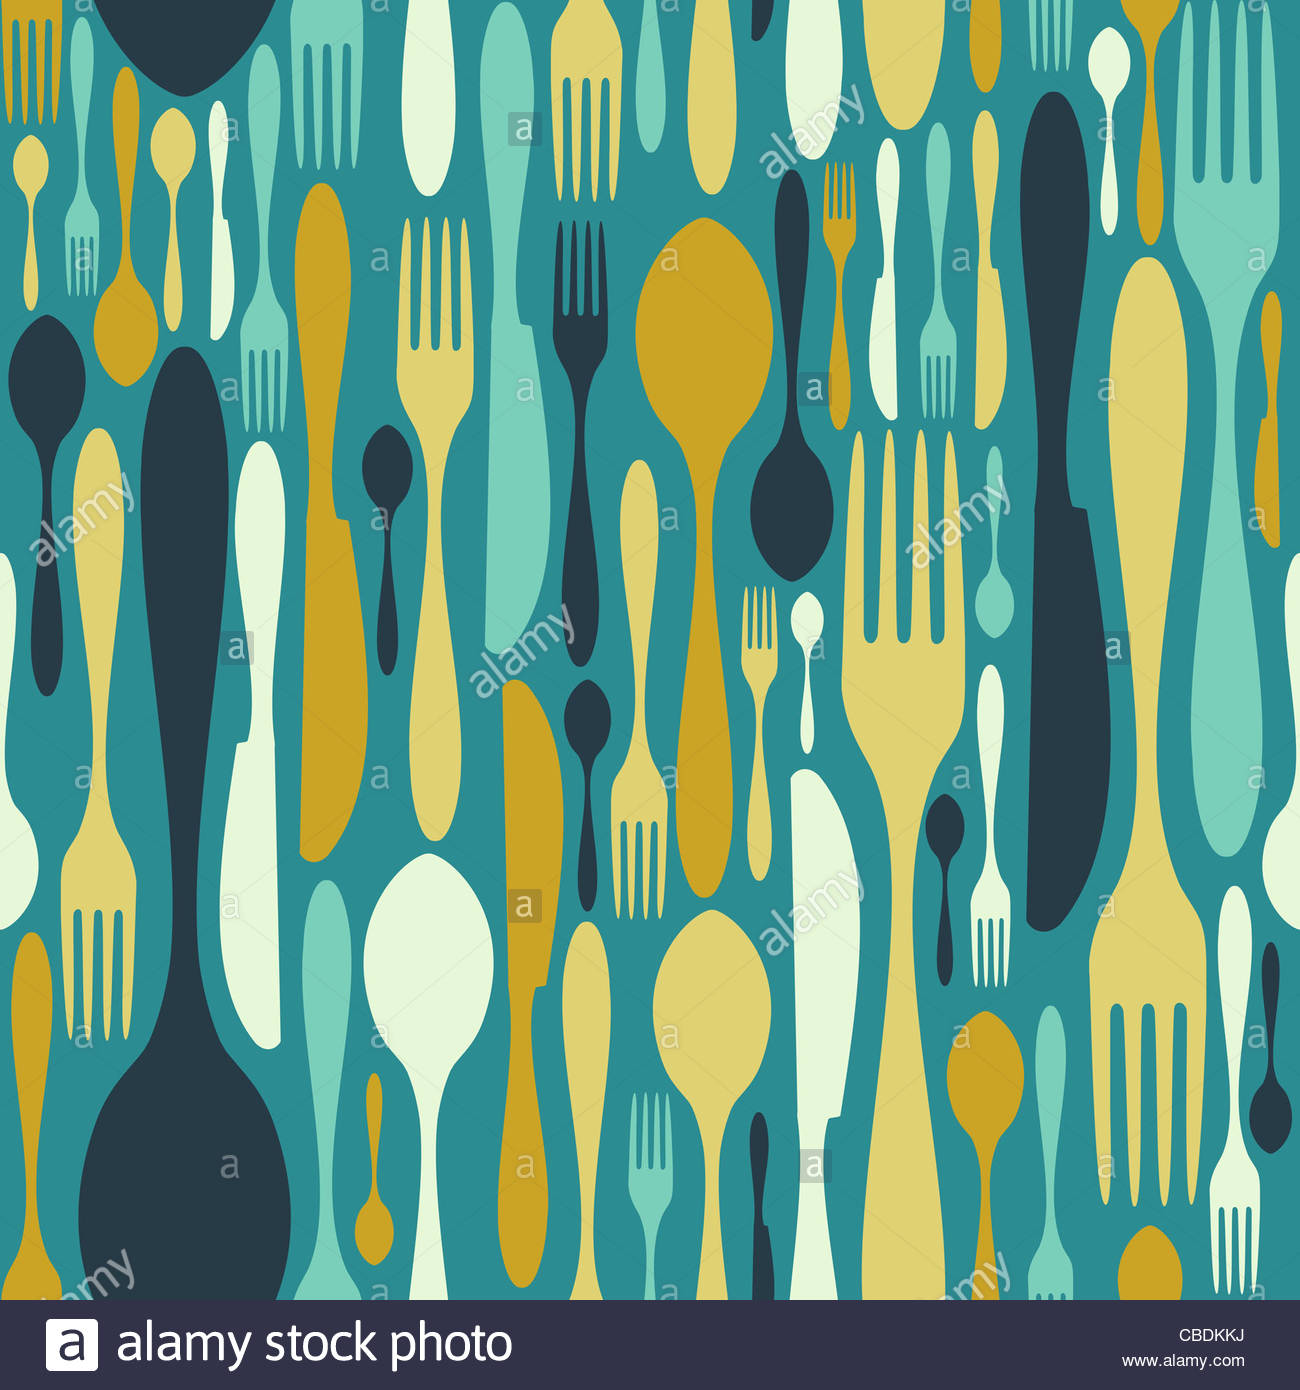 Cutlery Icons Seamless Pattern Background Fork Knife And Spoon